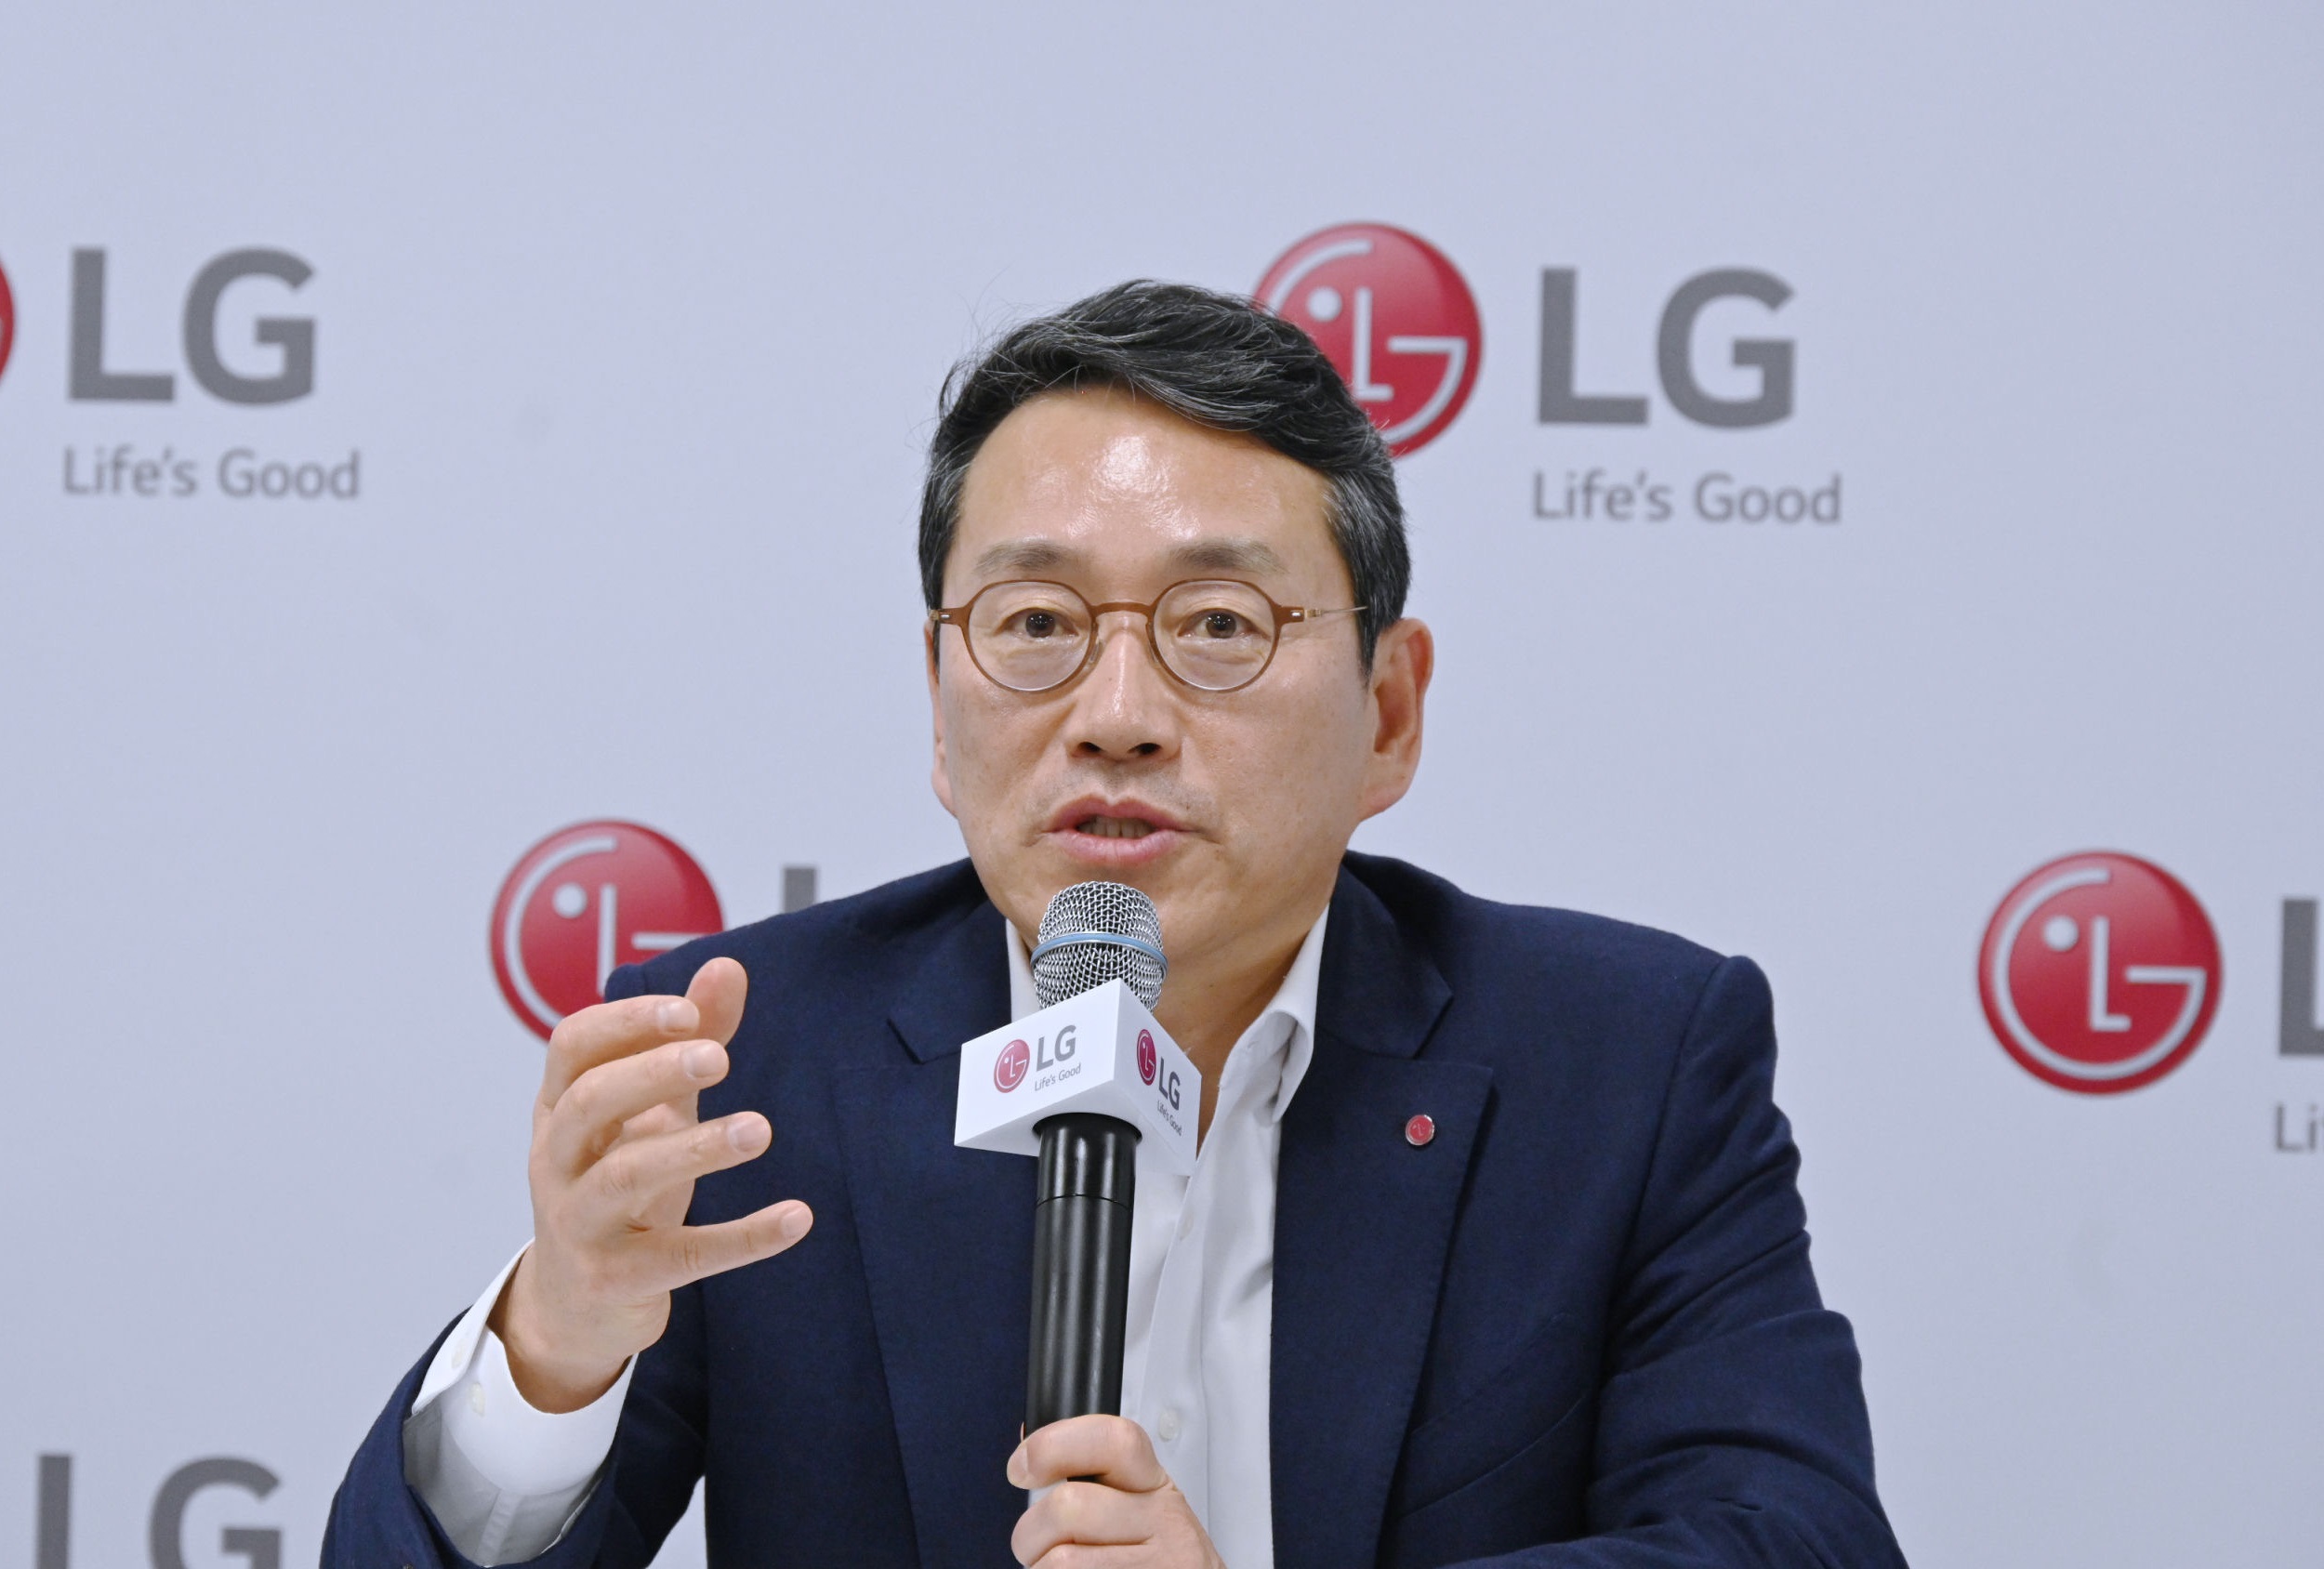 LG CEO William Cho reiterating the company's vision and strategy at the press conference in Las Vagas